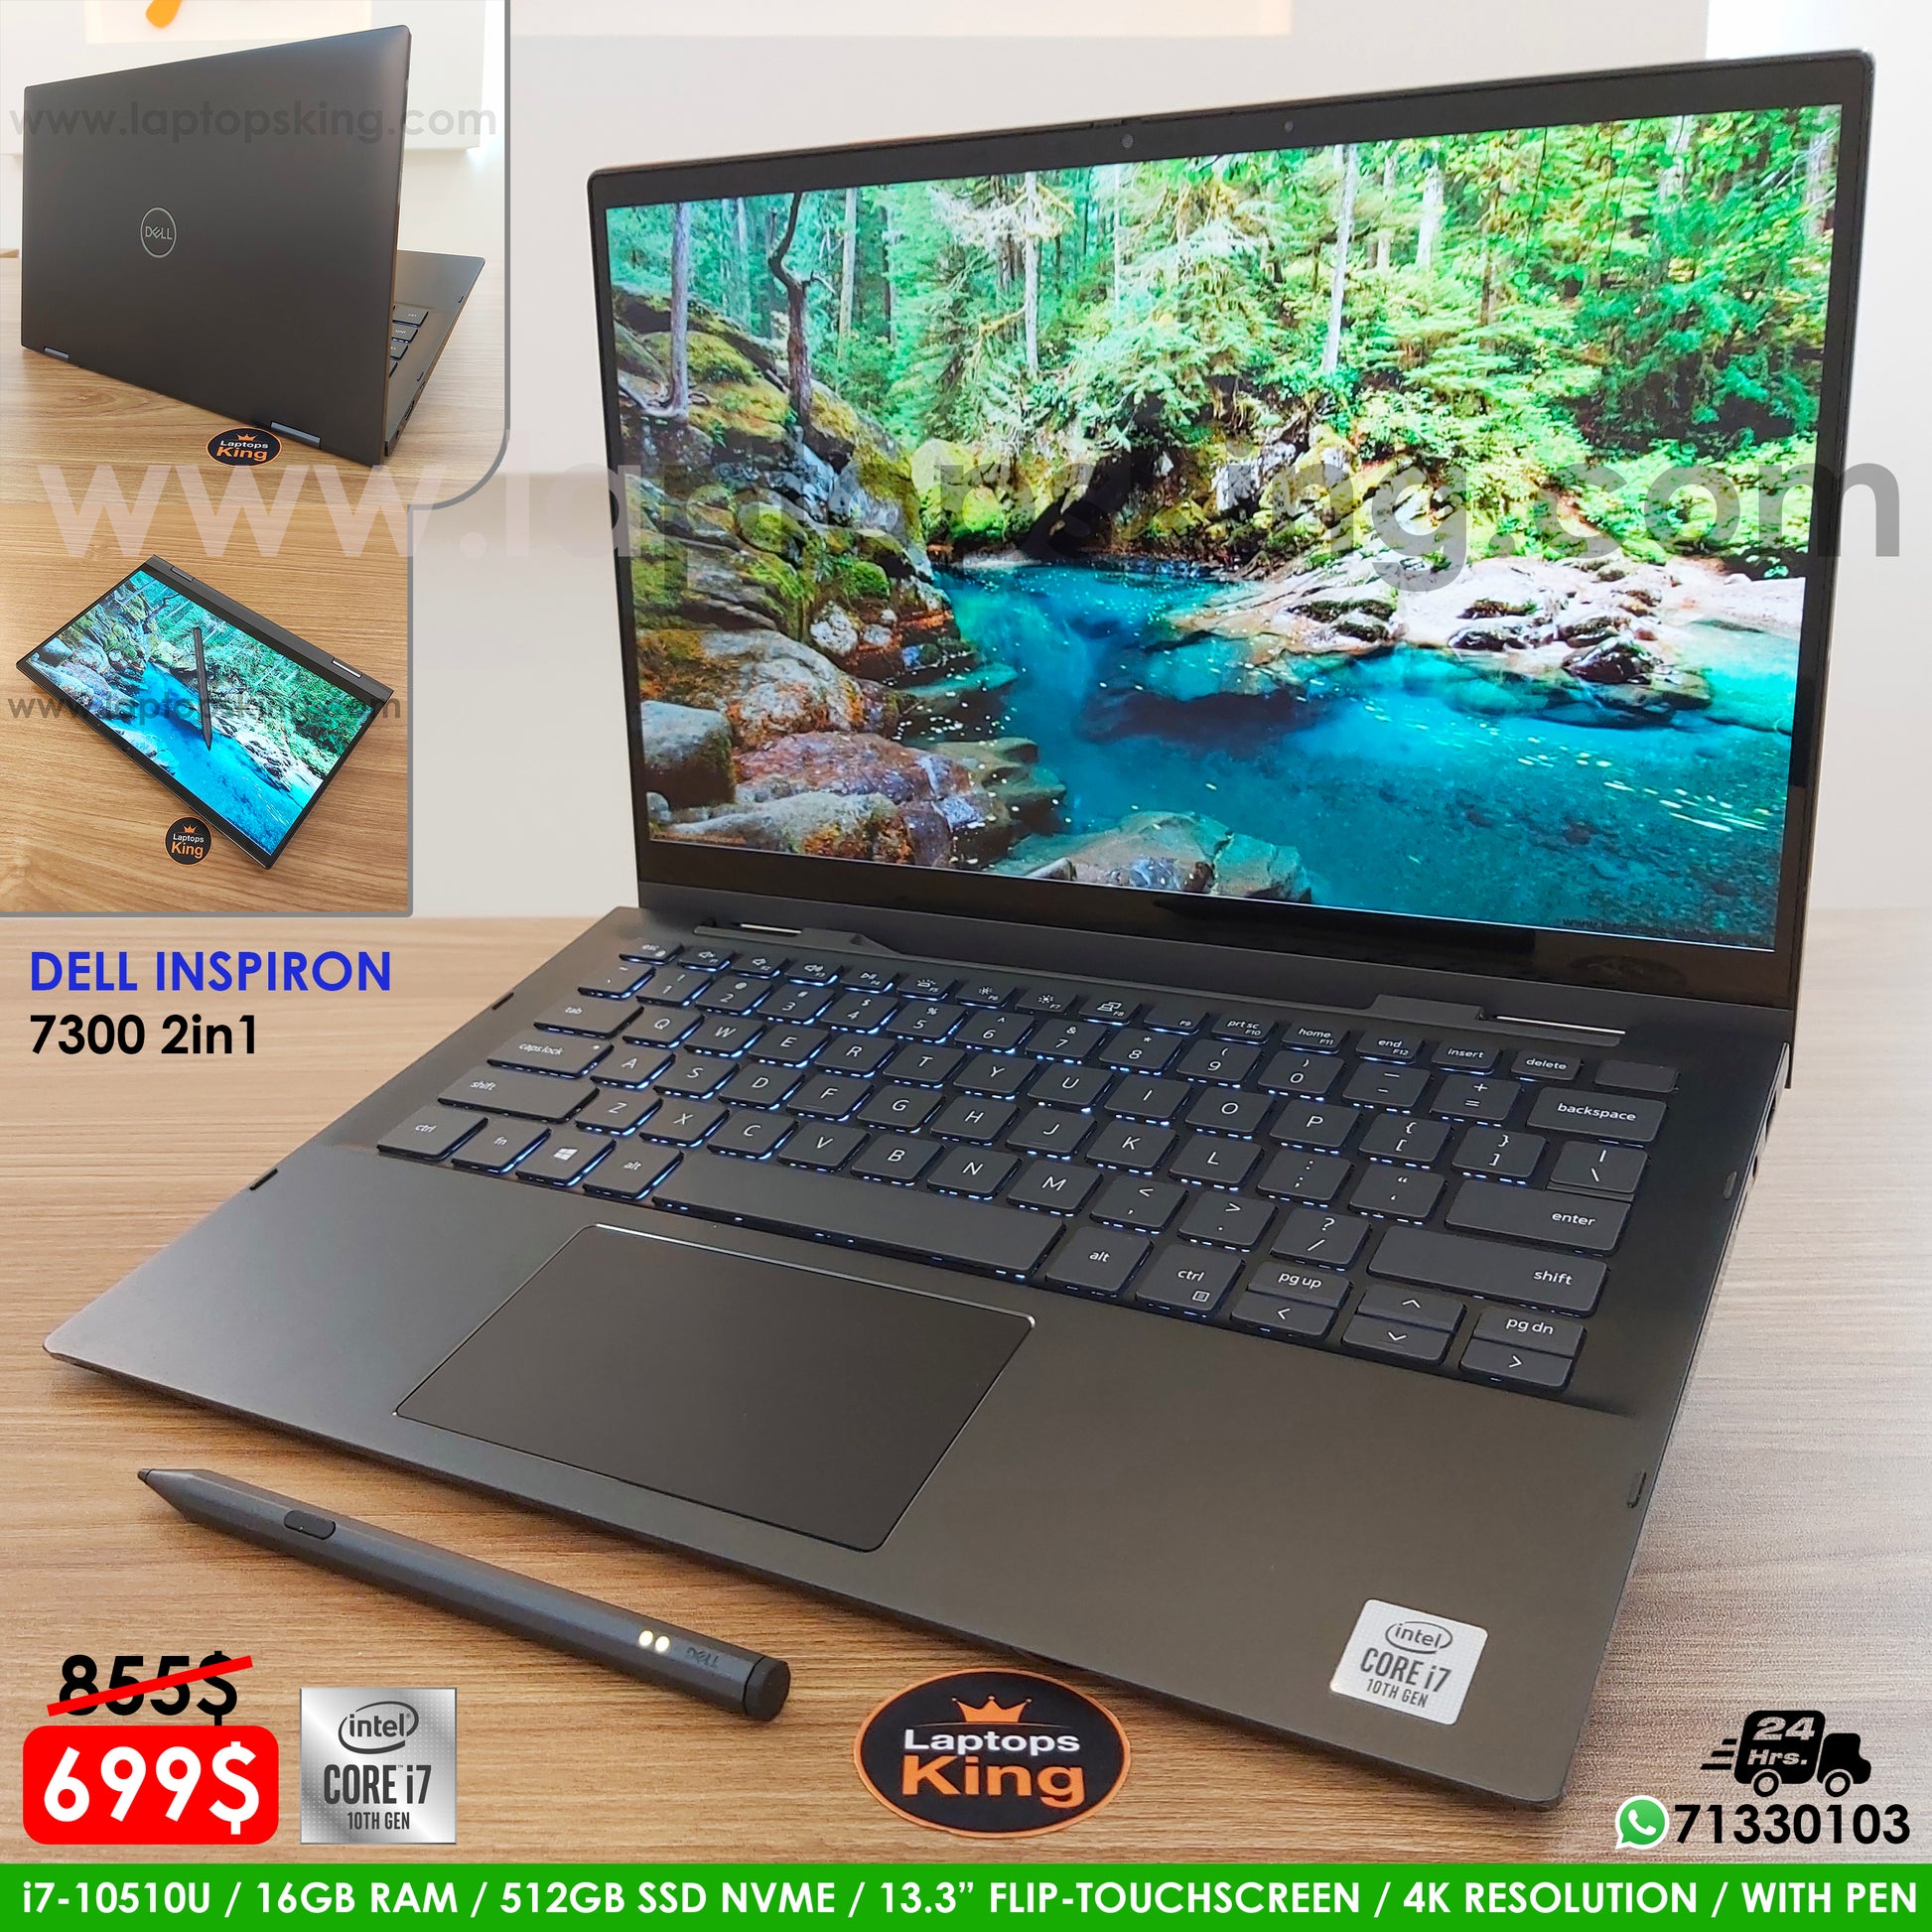 Dell Inspiron 7300 i7-10510U 10th Gen 4K 2in1 Laptop (Used Very Clean) Computer for sale Lebanon, laptop in Lebanon, laptop for sale Lebanon, best programming laptop, laptop for sale in Lebanon, laptops for sale in Lebanon, laptop for sale in Lebanon, buy computer Lebanon, buy laptop Lebanon.